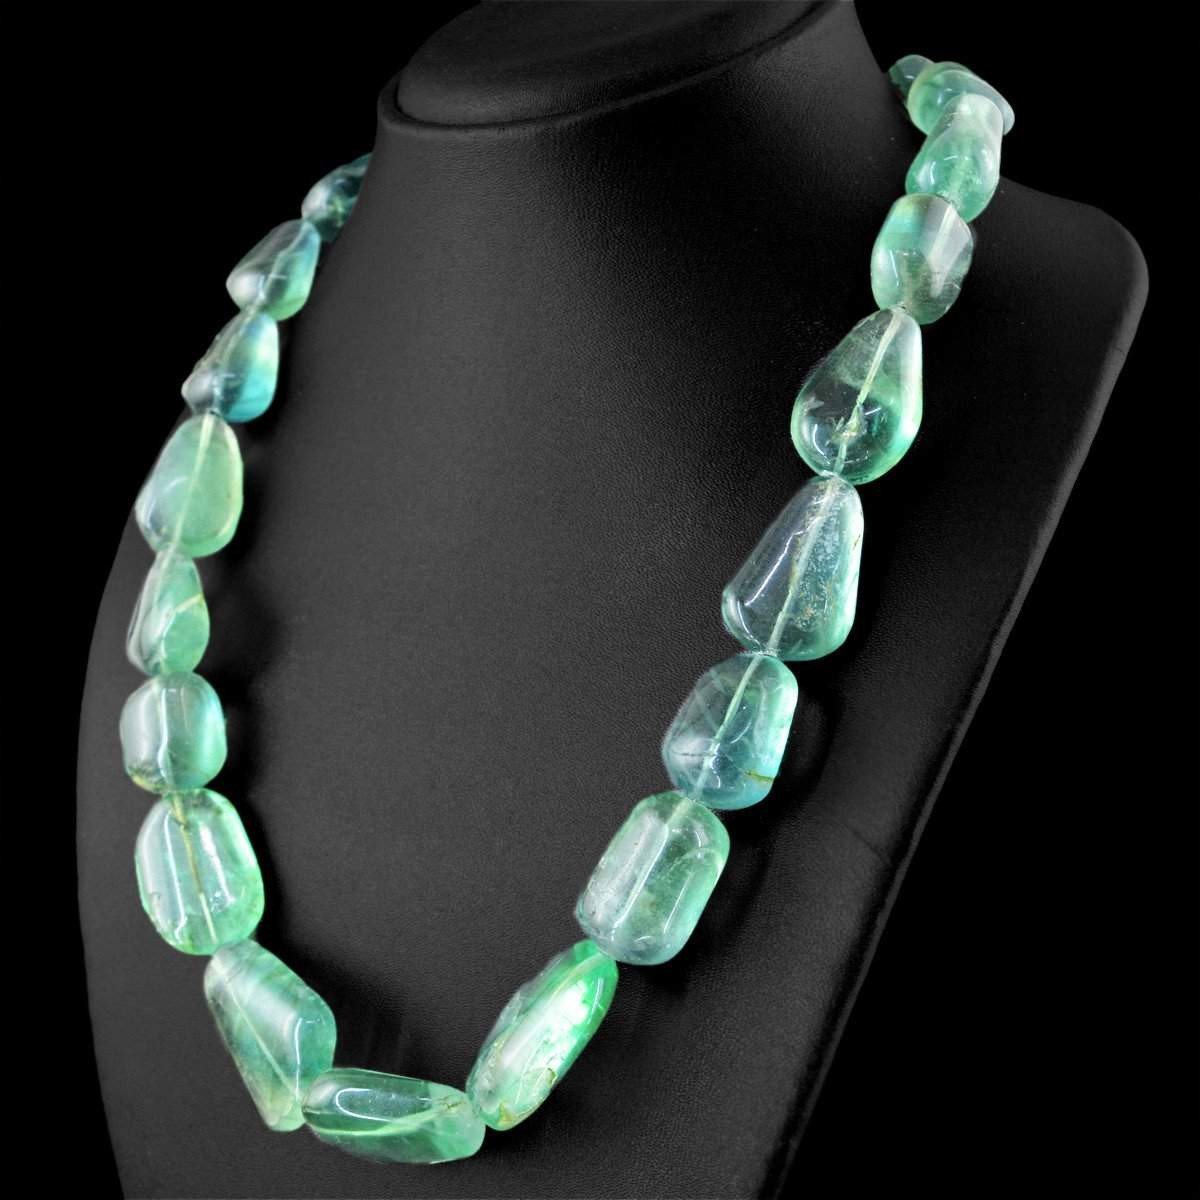 gemsmore:Natural Green Fluorite Necklace 20 Inches Long Huge Beads